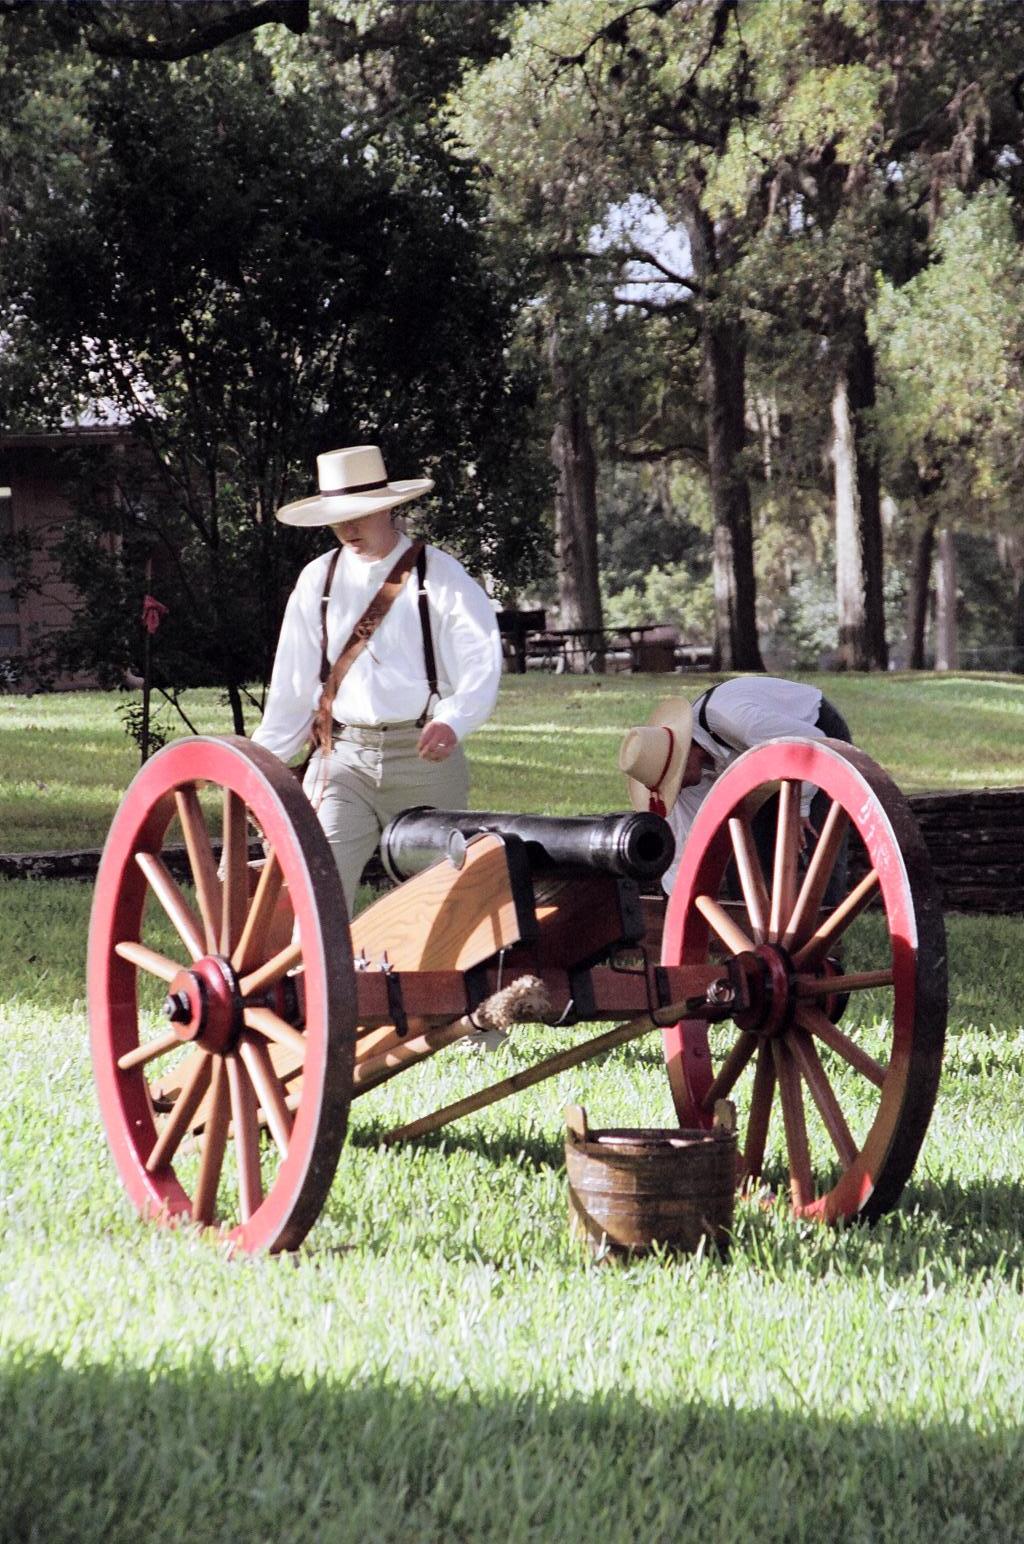 Cannon at Texas Heroes Day